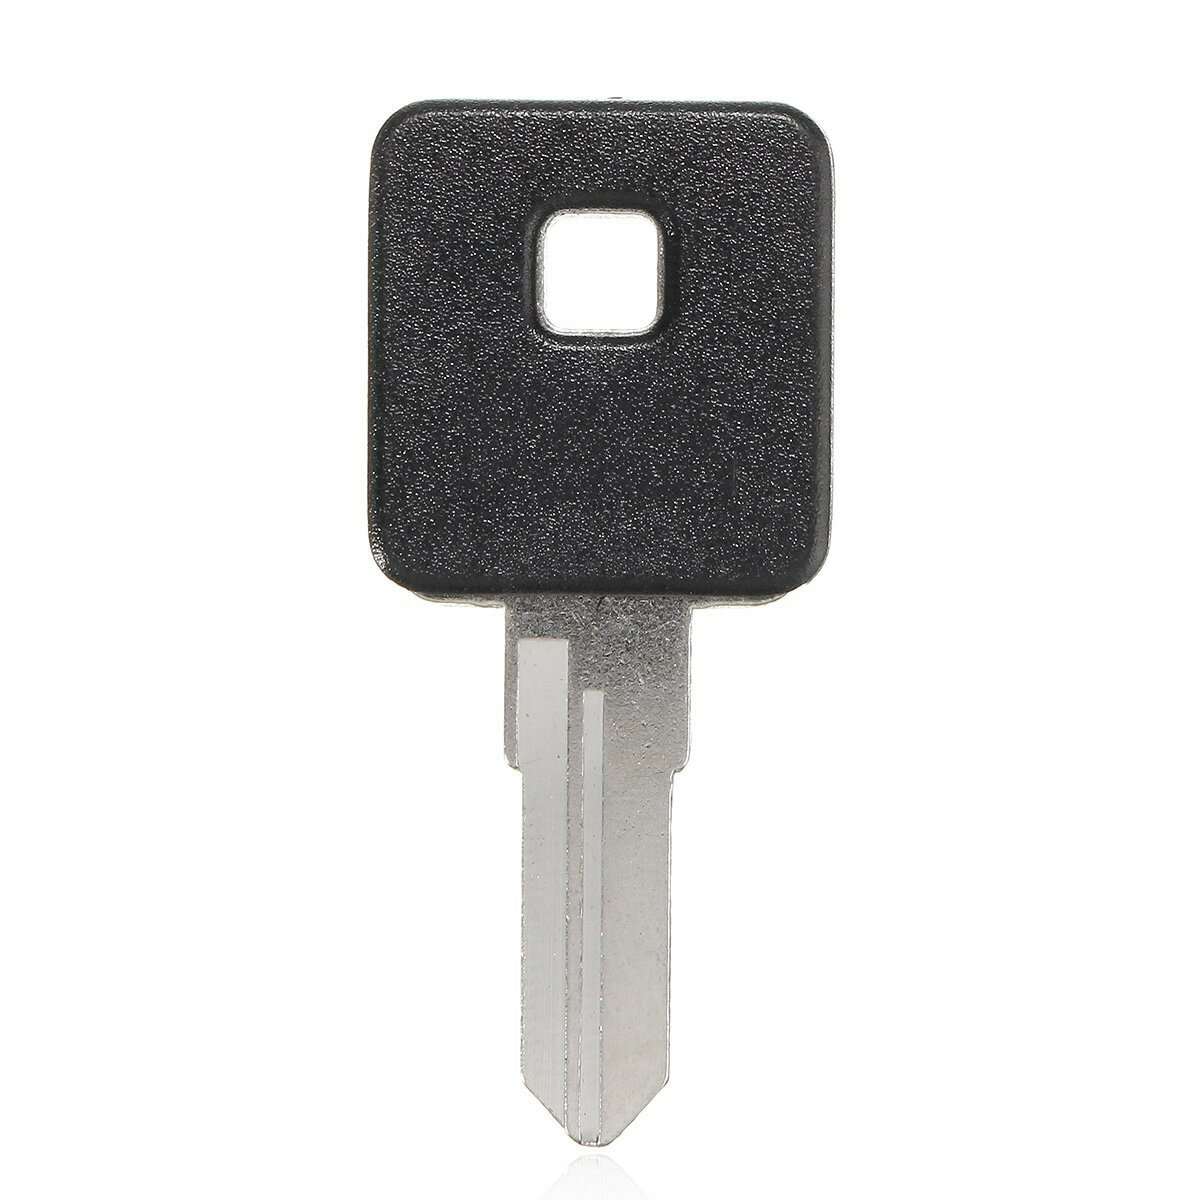 Ignition Blank Key For Davidson 883 1200 Motorcycle